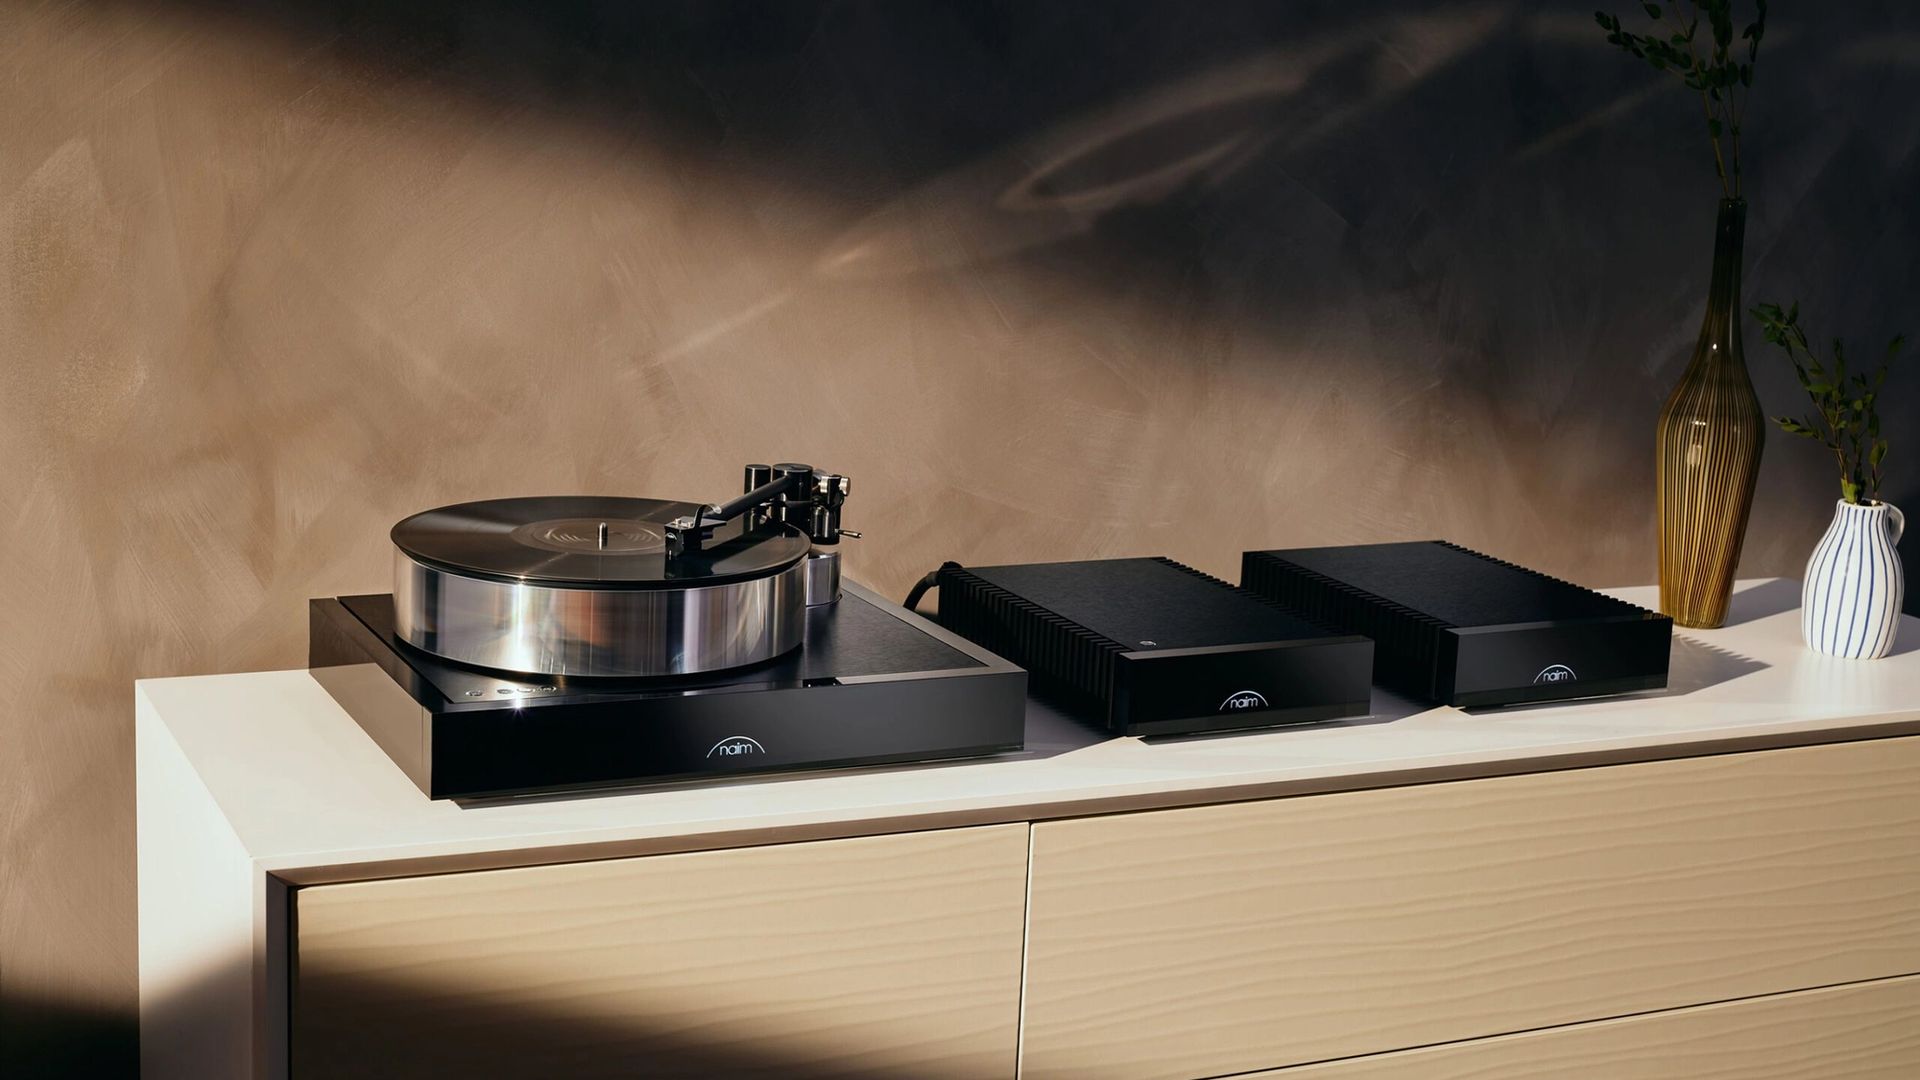 The 5 best vinyl players that’ll spin your home audio to new heights